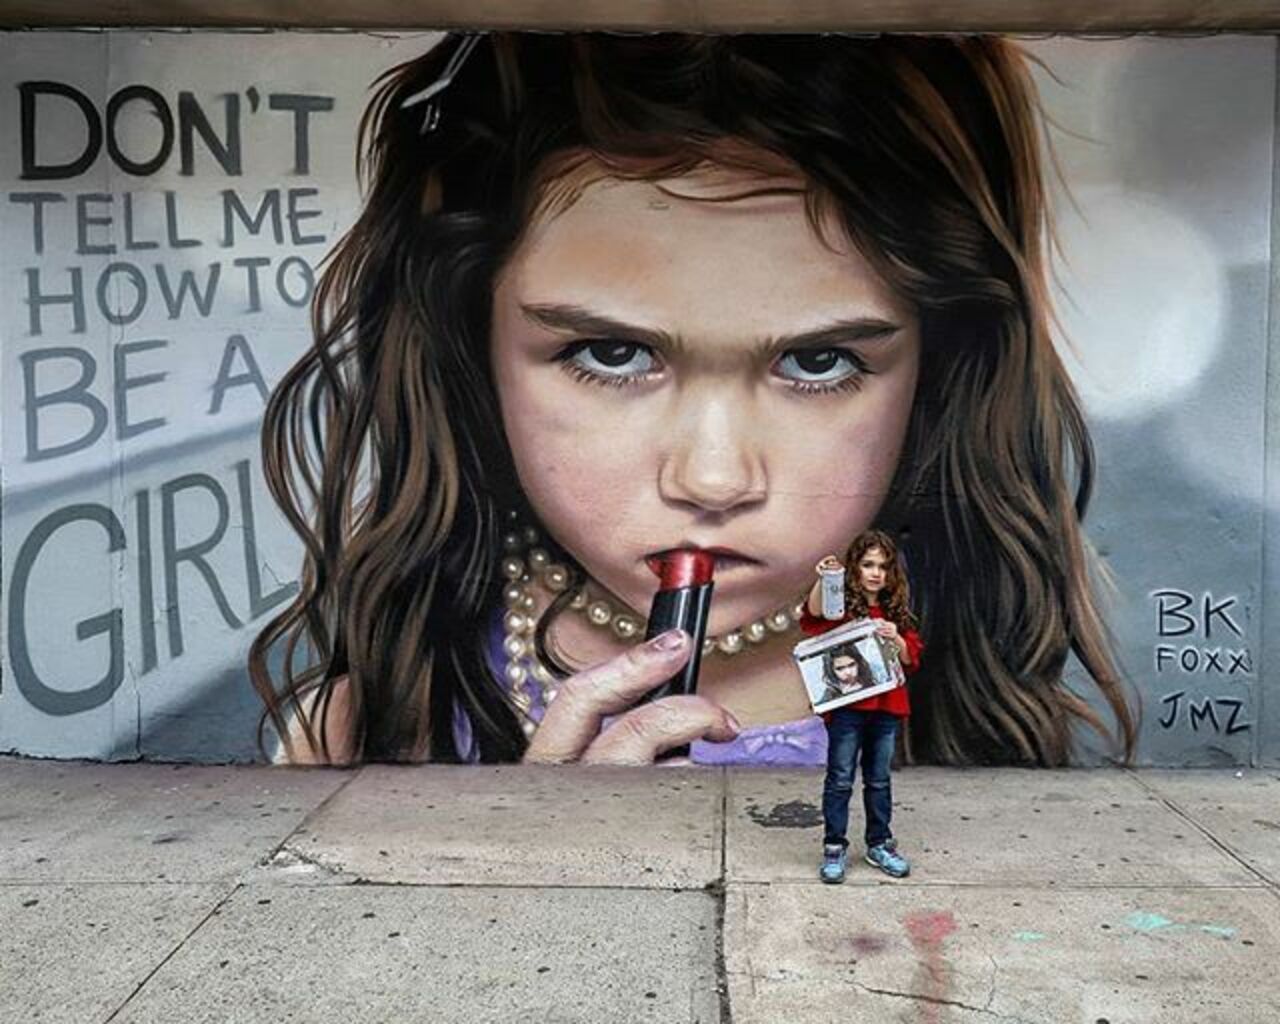 ... be a rebel, be yourself! Take your dreams... and leave your colors! Goooodmorning! Art by BKFoxx in New York #StreetArt #Art #WakeUp #Graffiti #Goodmorning #Dreamer #Rebel #BeYourself #Writers #LeaveYourMark #FollowYourHeart #UrbanArt #NewYorkCity https://t.co/4Fn1Qpx9ai